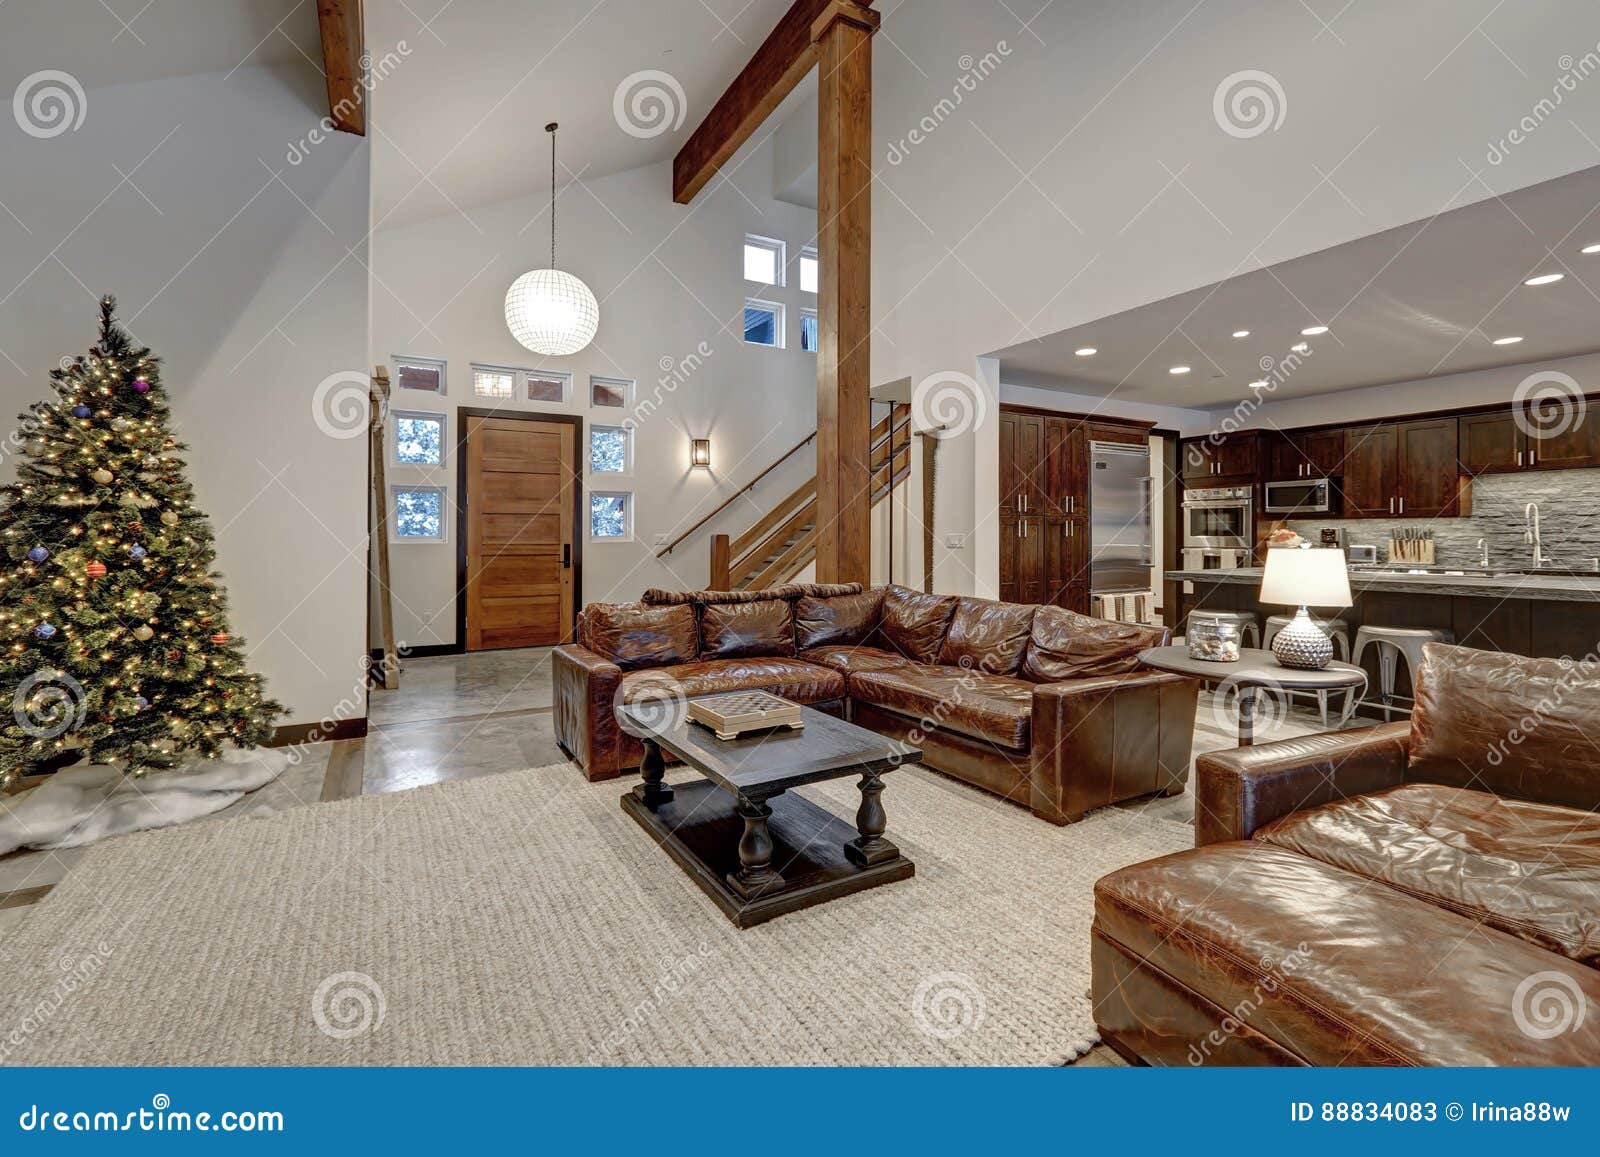 Vaulted Ceiling Living Room with Brown Leather Sofas Stock Image ...